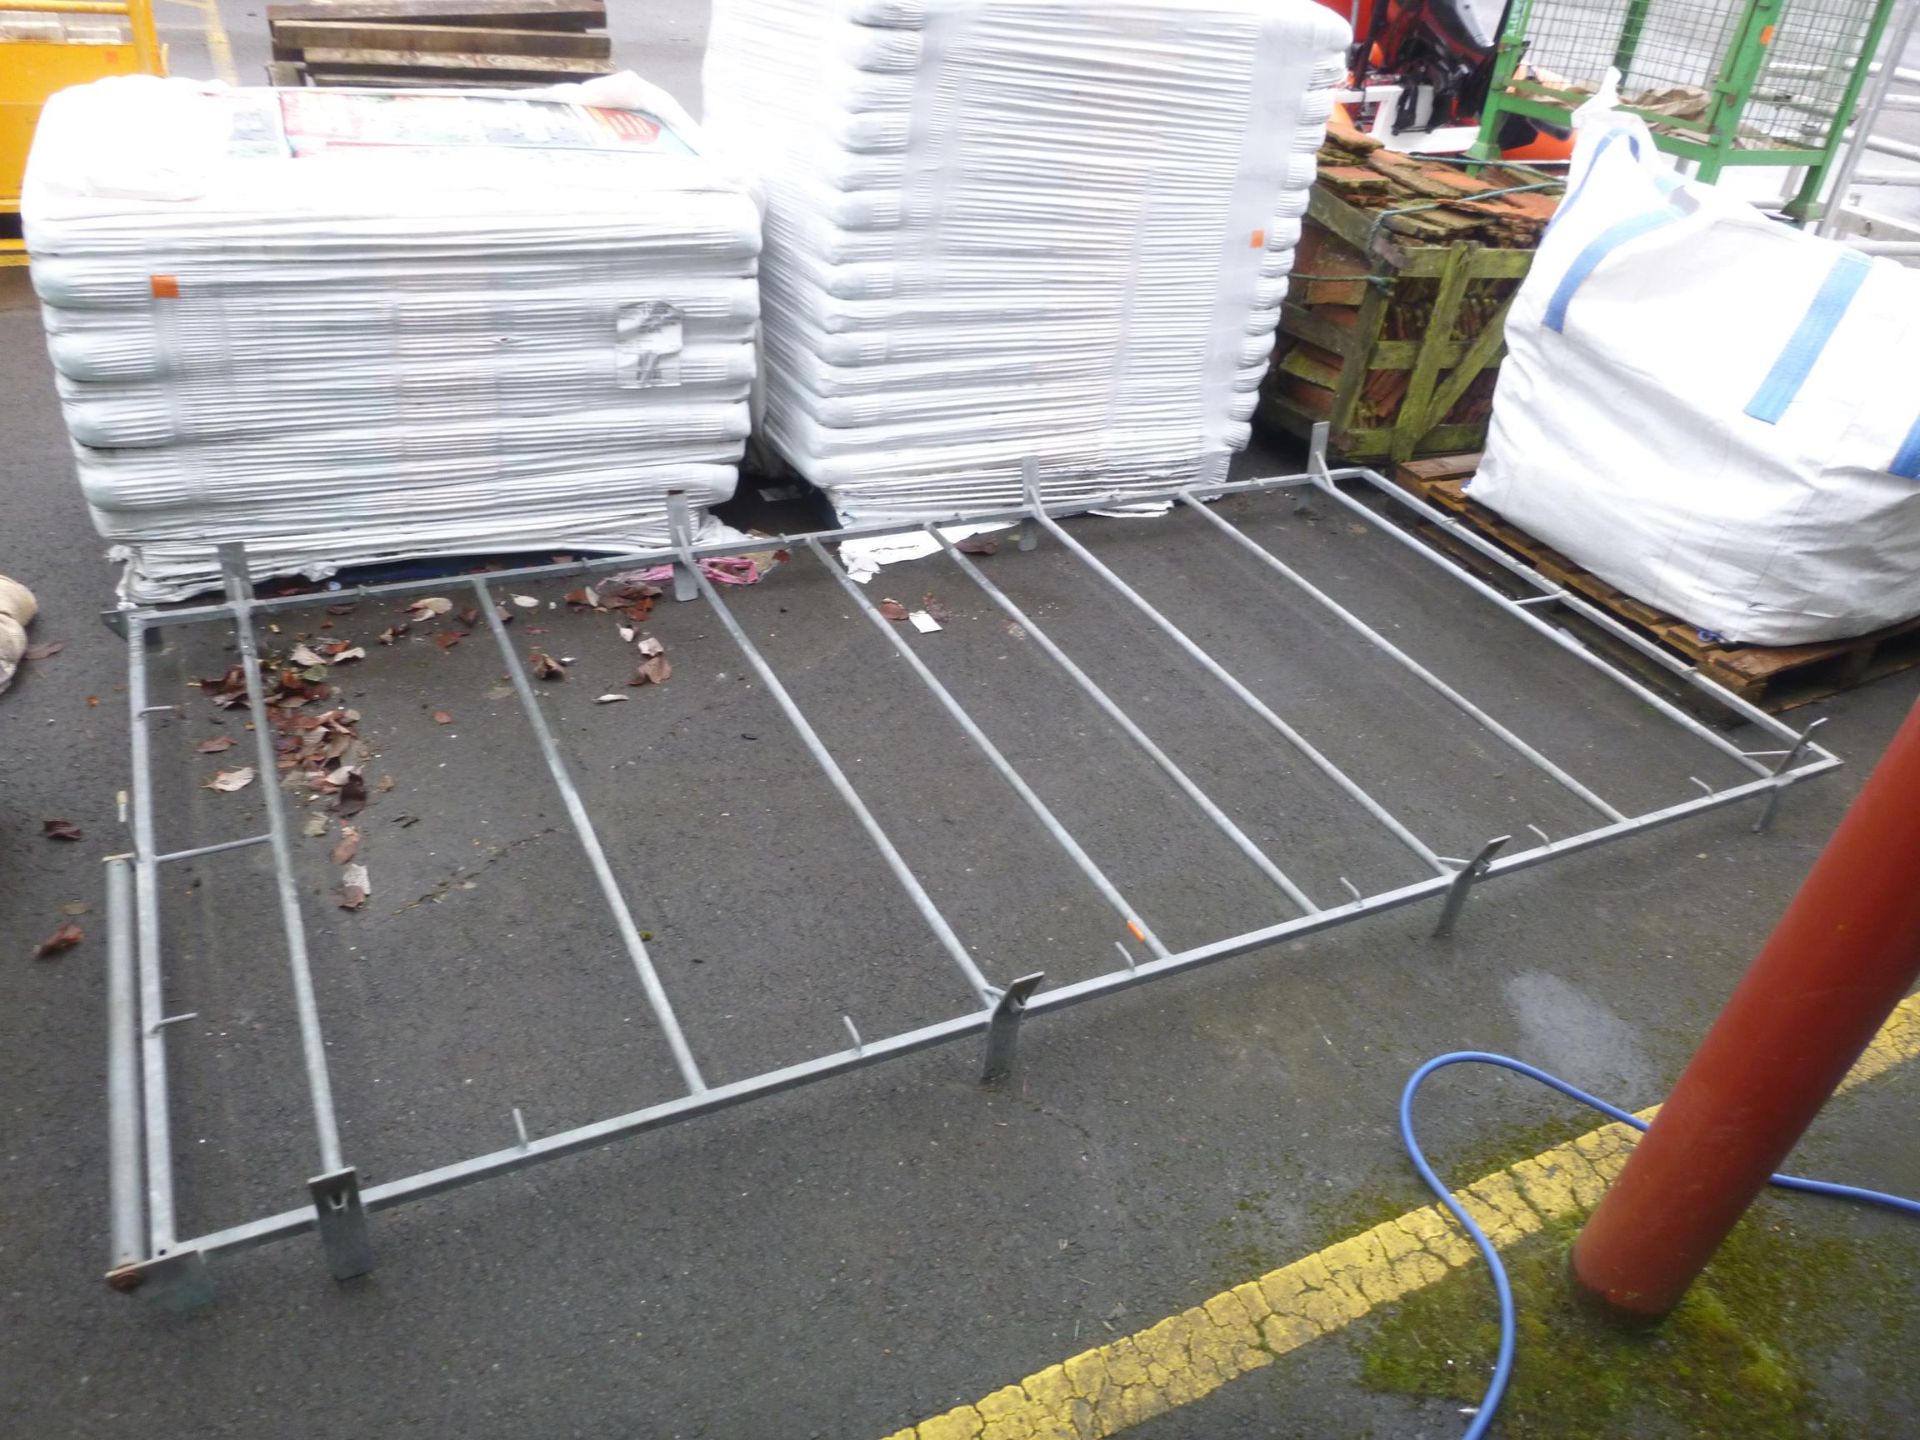 A Van Roof Rack c/w Ladder Roller (No Fittings). Please note there is a £5 Plus VAT Lift Out Fee